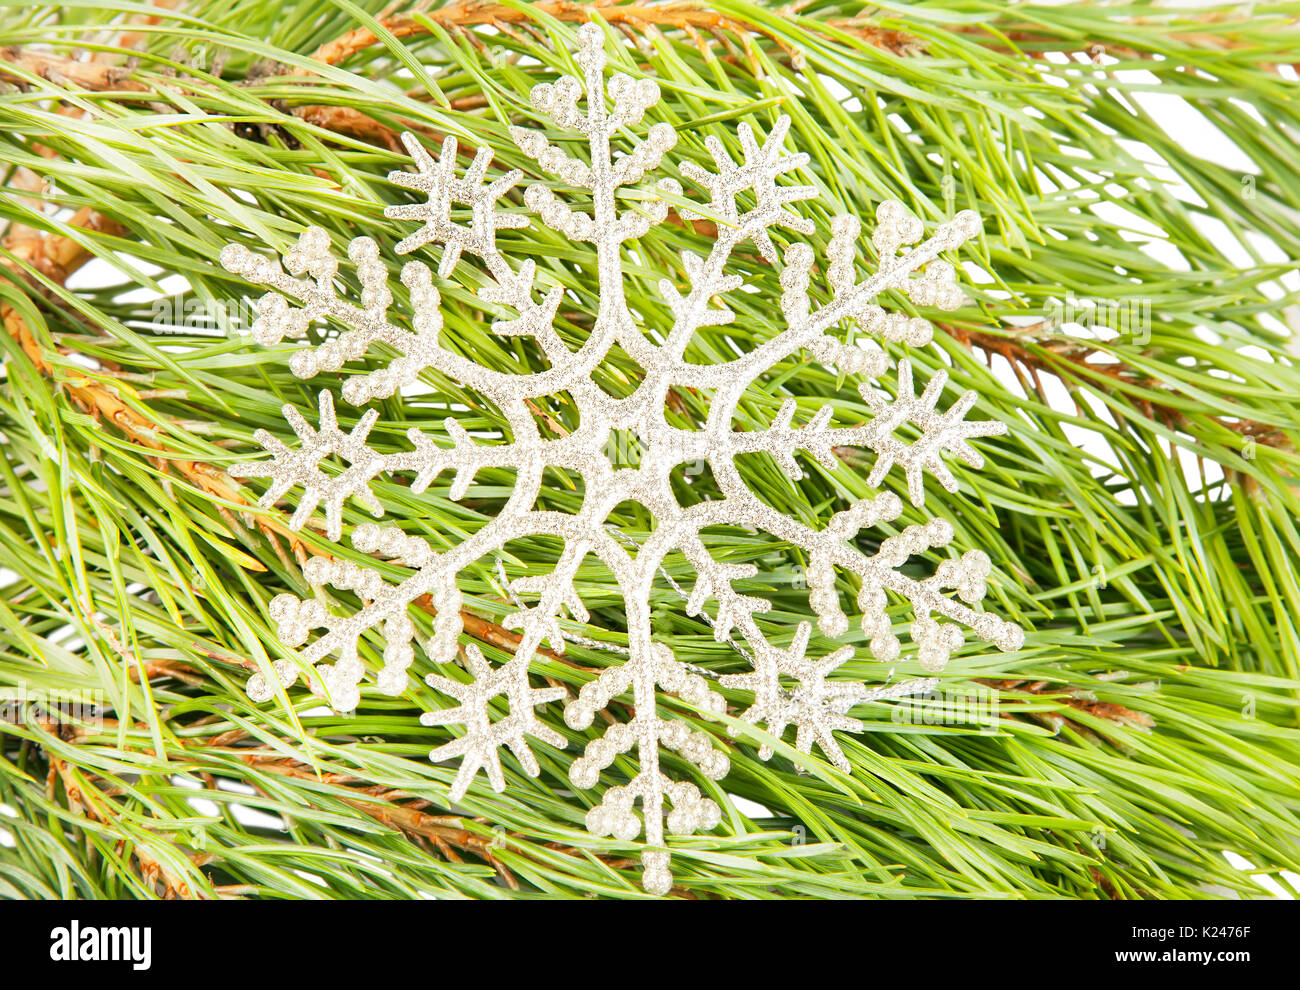 Artificial new year snowflake on fir tree branch background close up Stock Photo